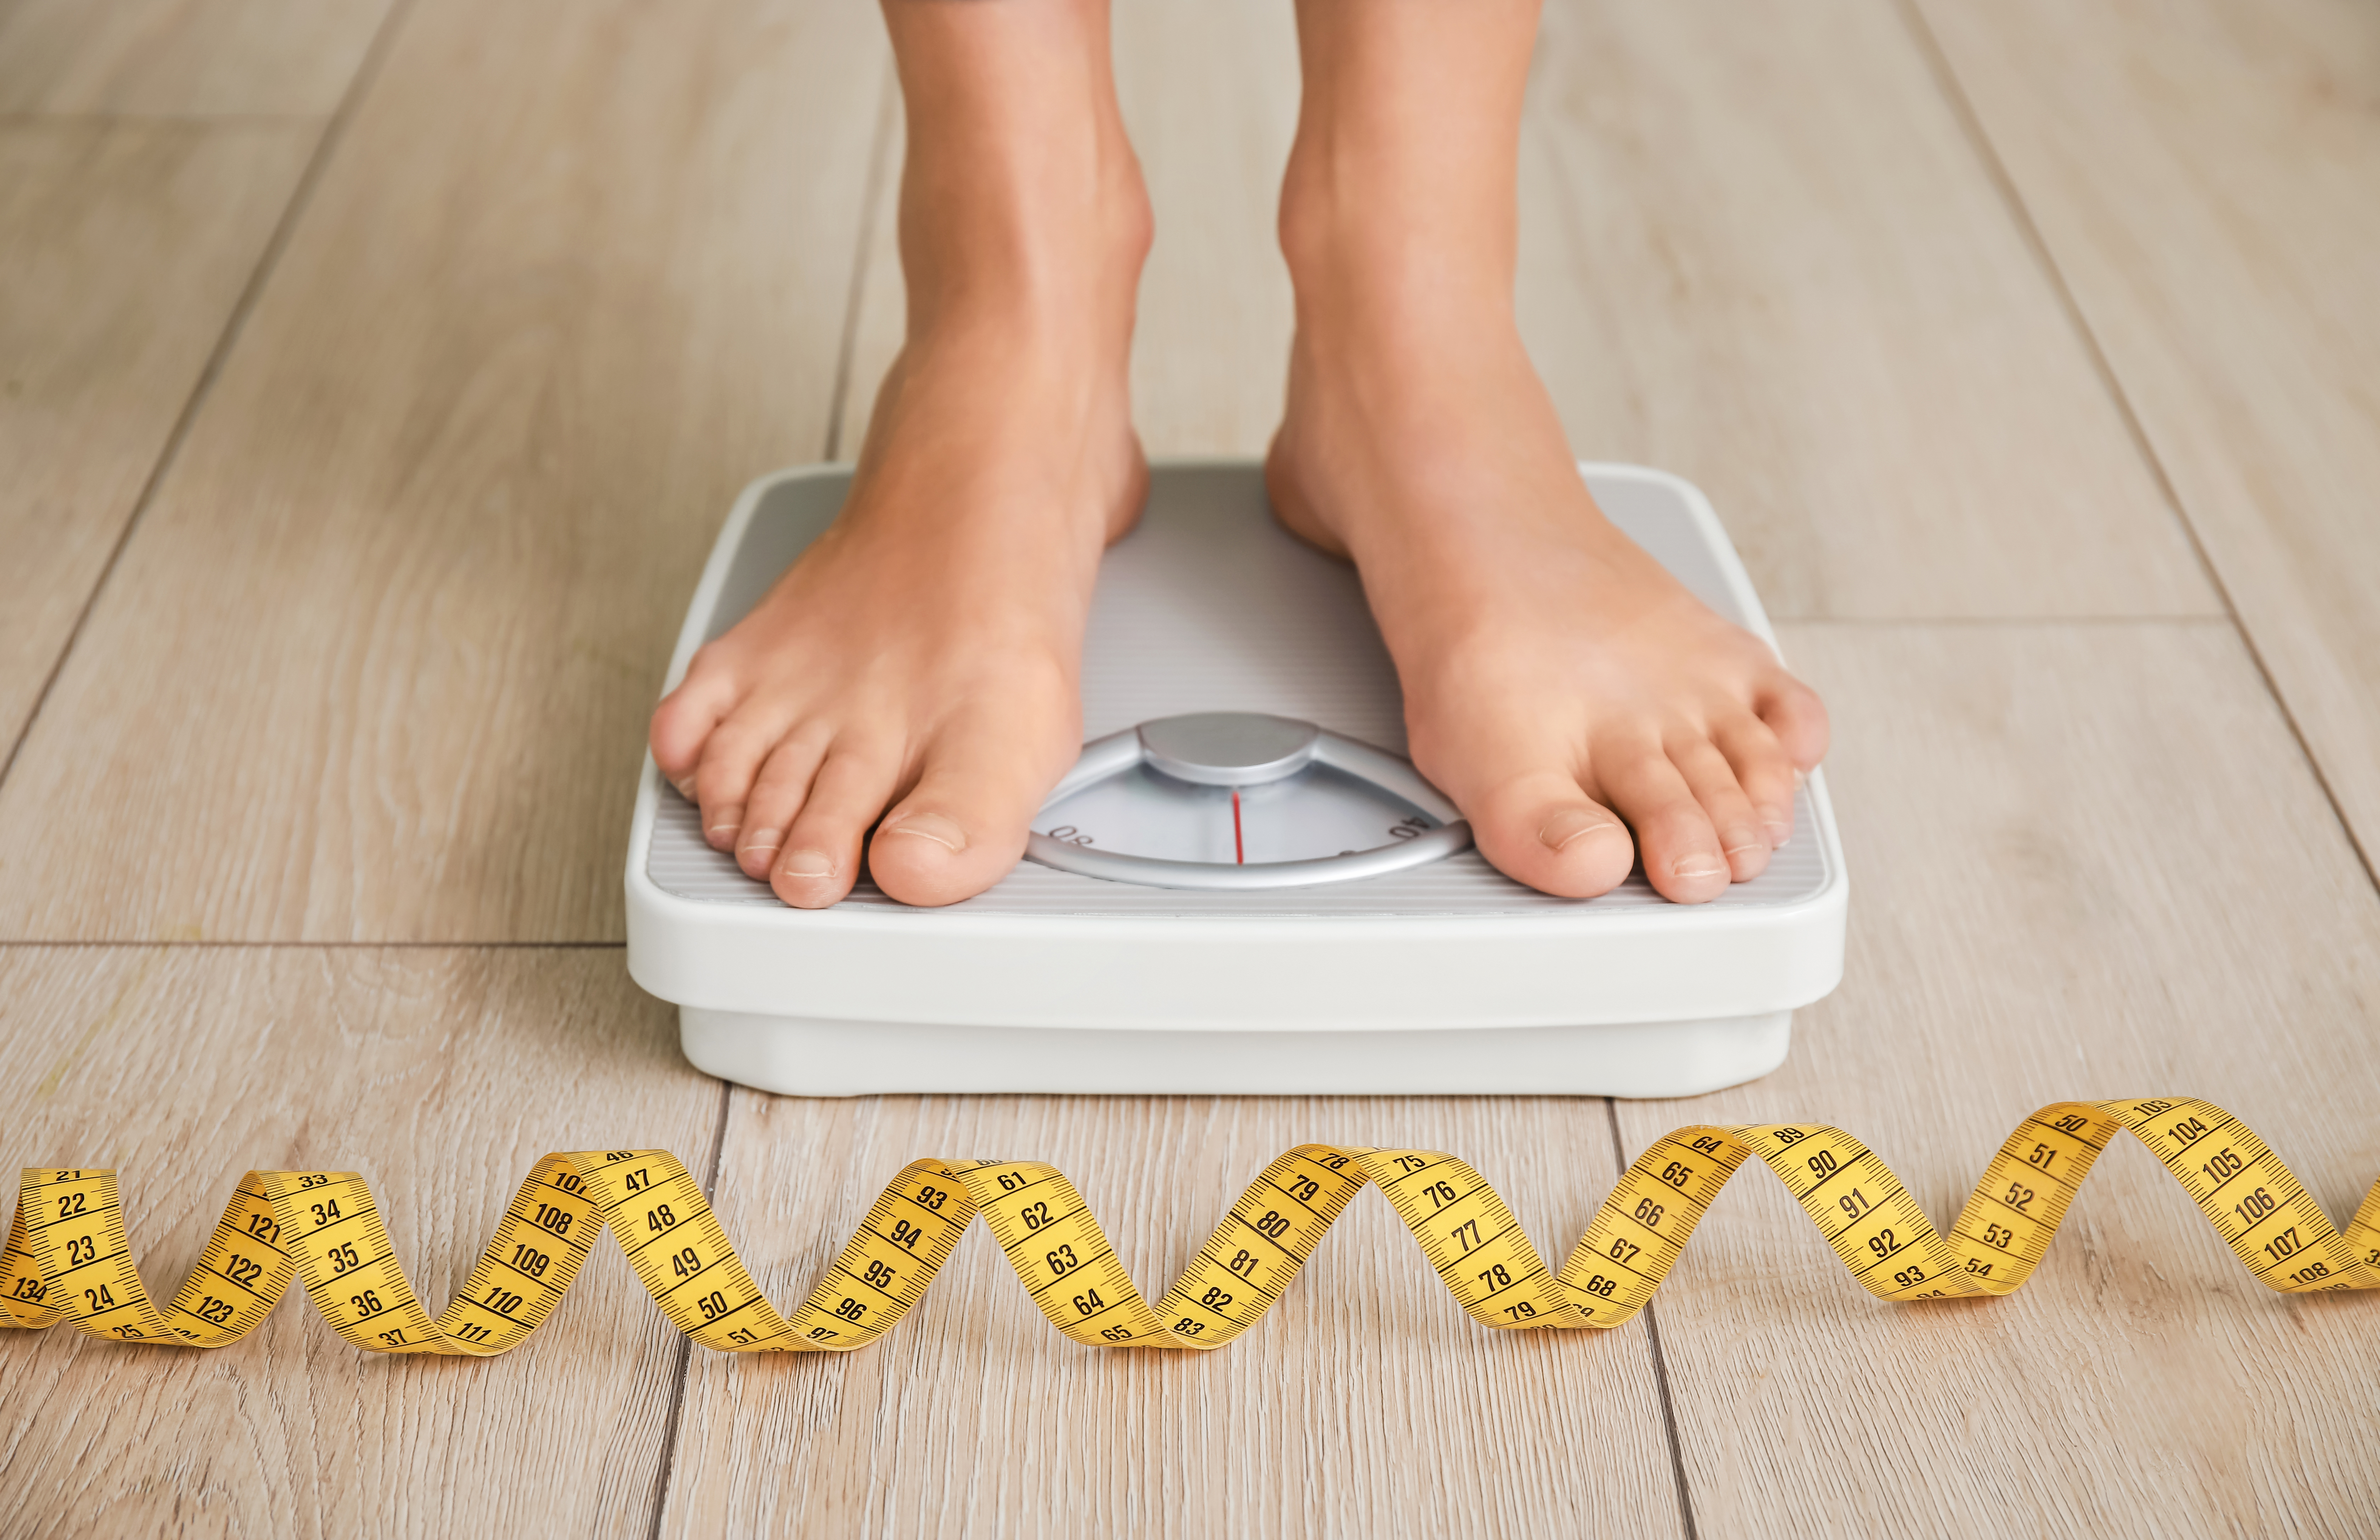 Weight loss person standing on scales feet